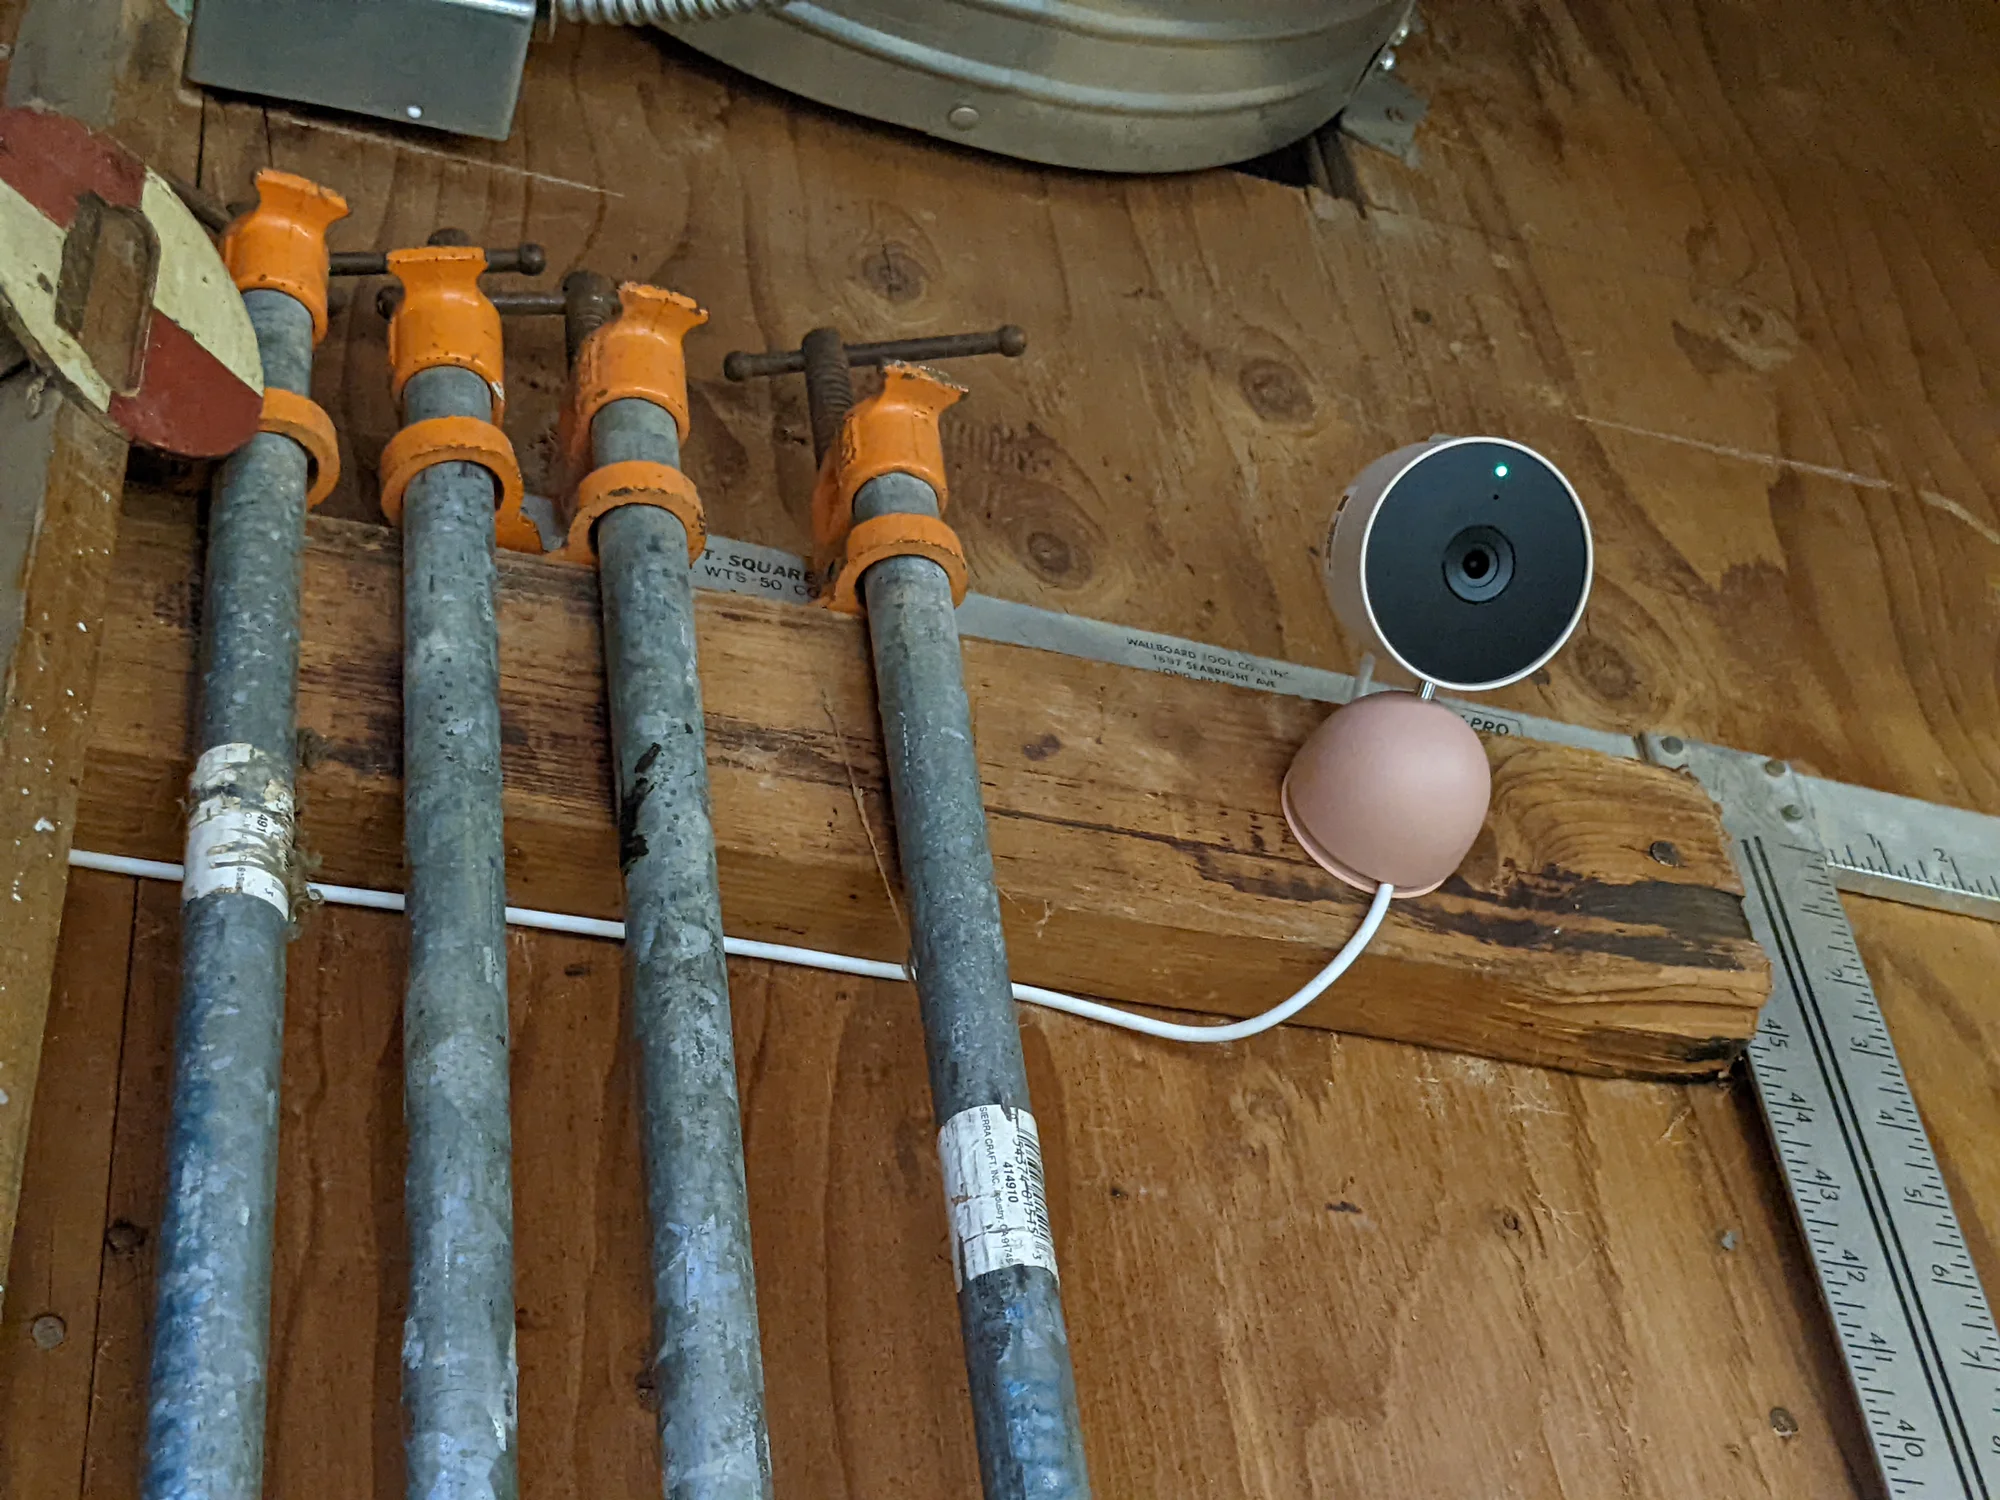 Nest Cam in the workshop, attached next to pipes against a wooden wall.